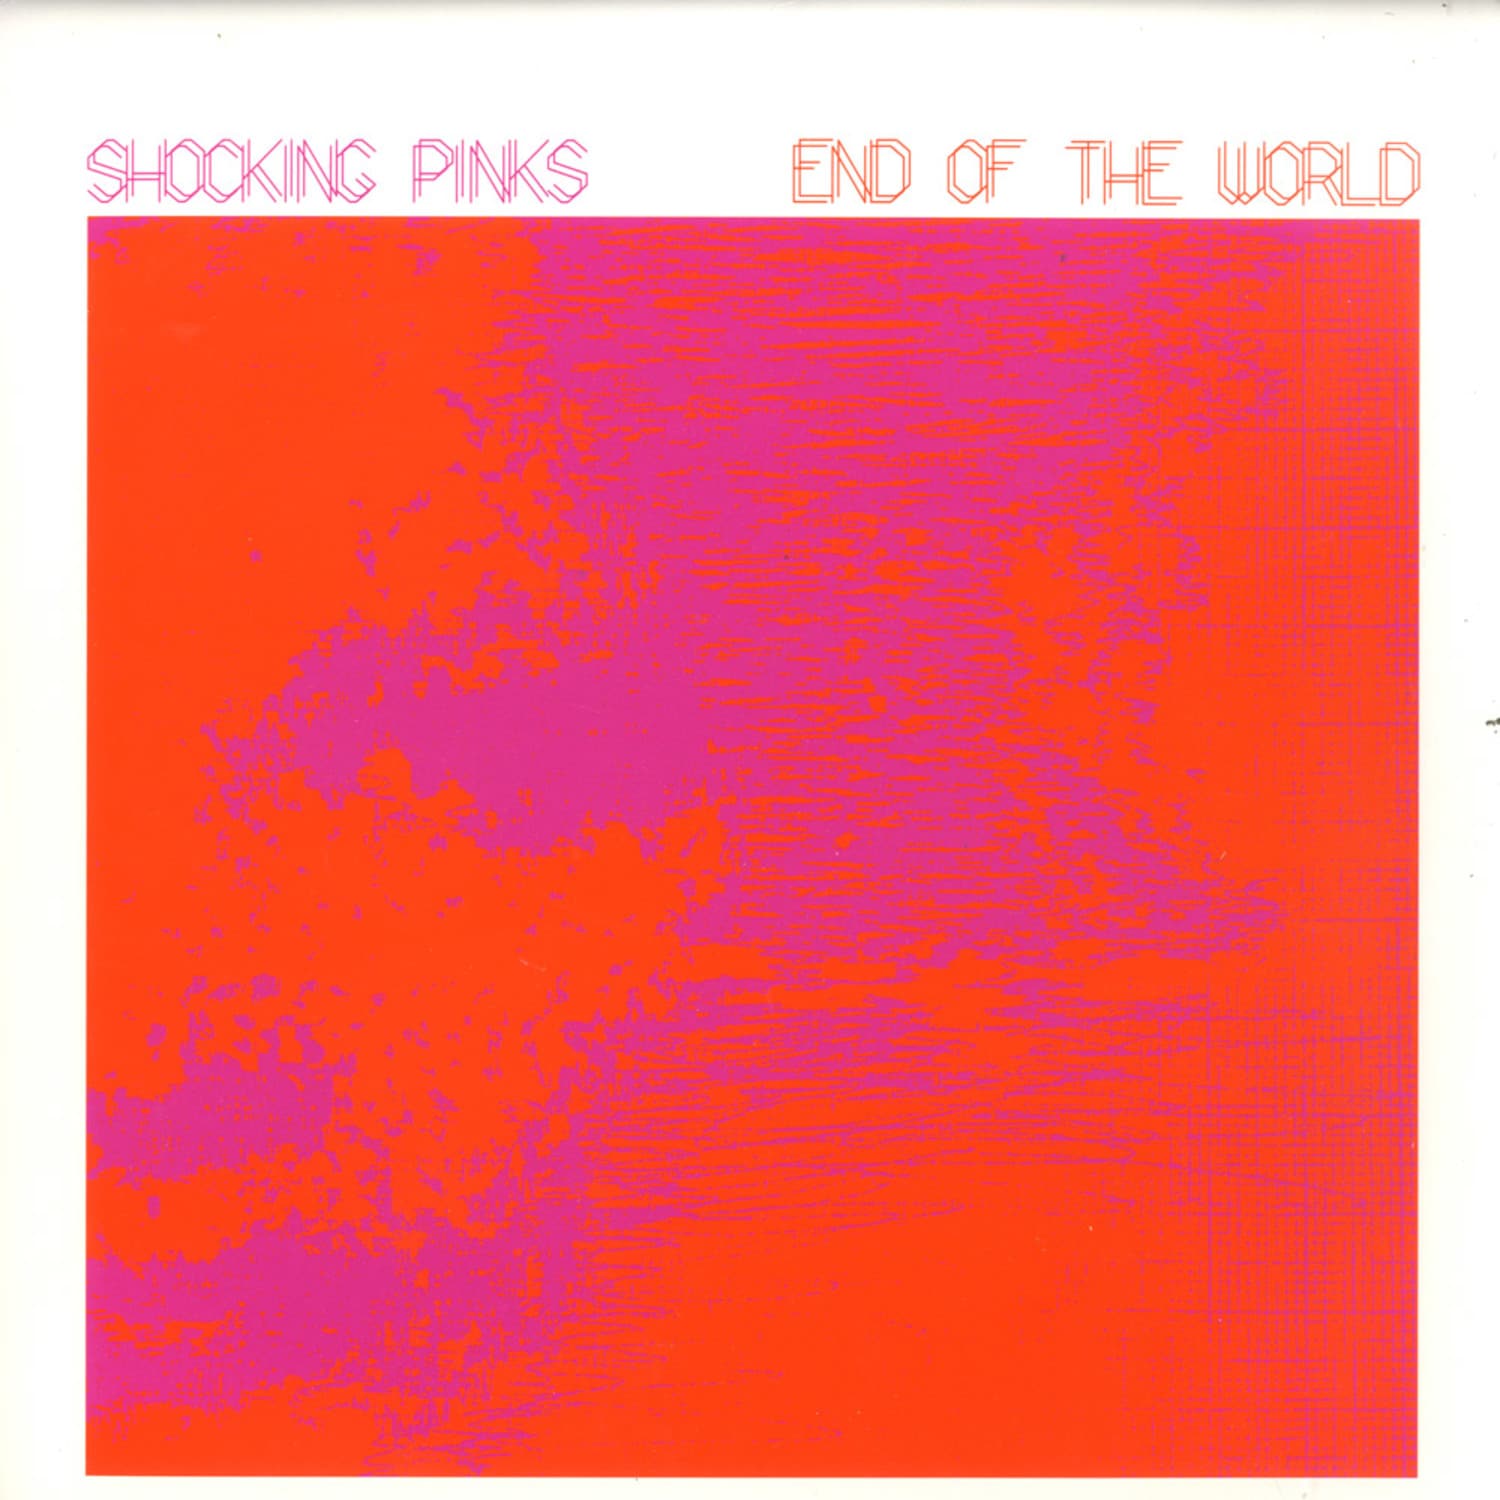 Shocking Pinks - END OF THE WORLD/GO TO SLEEP